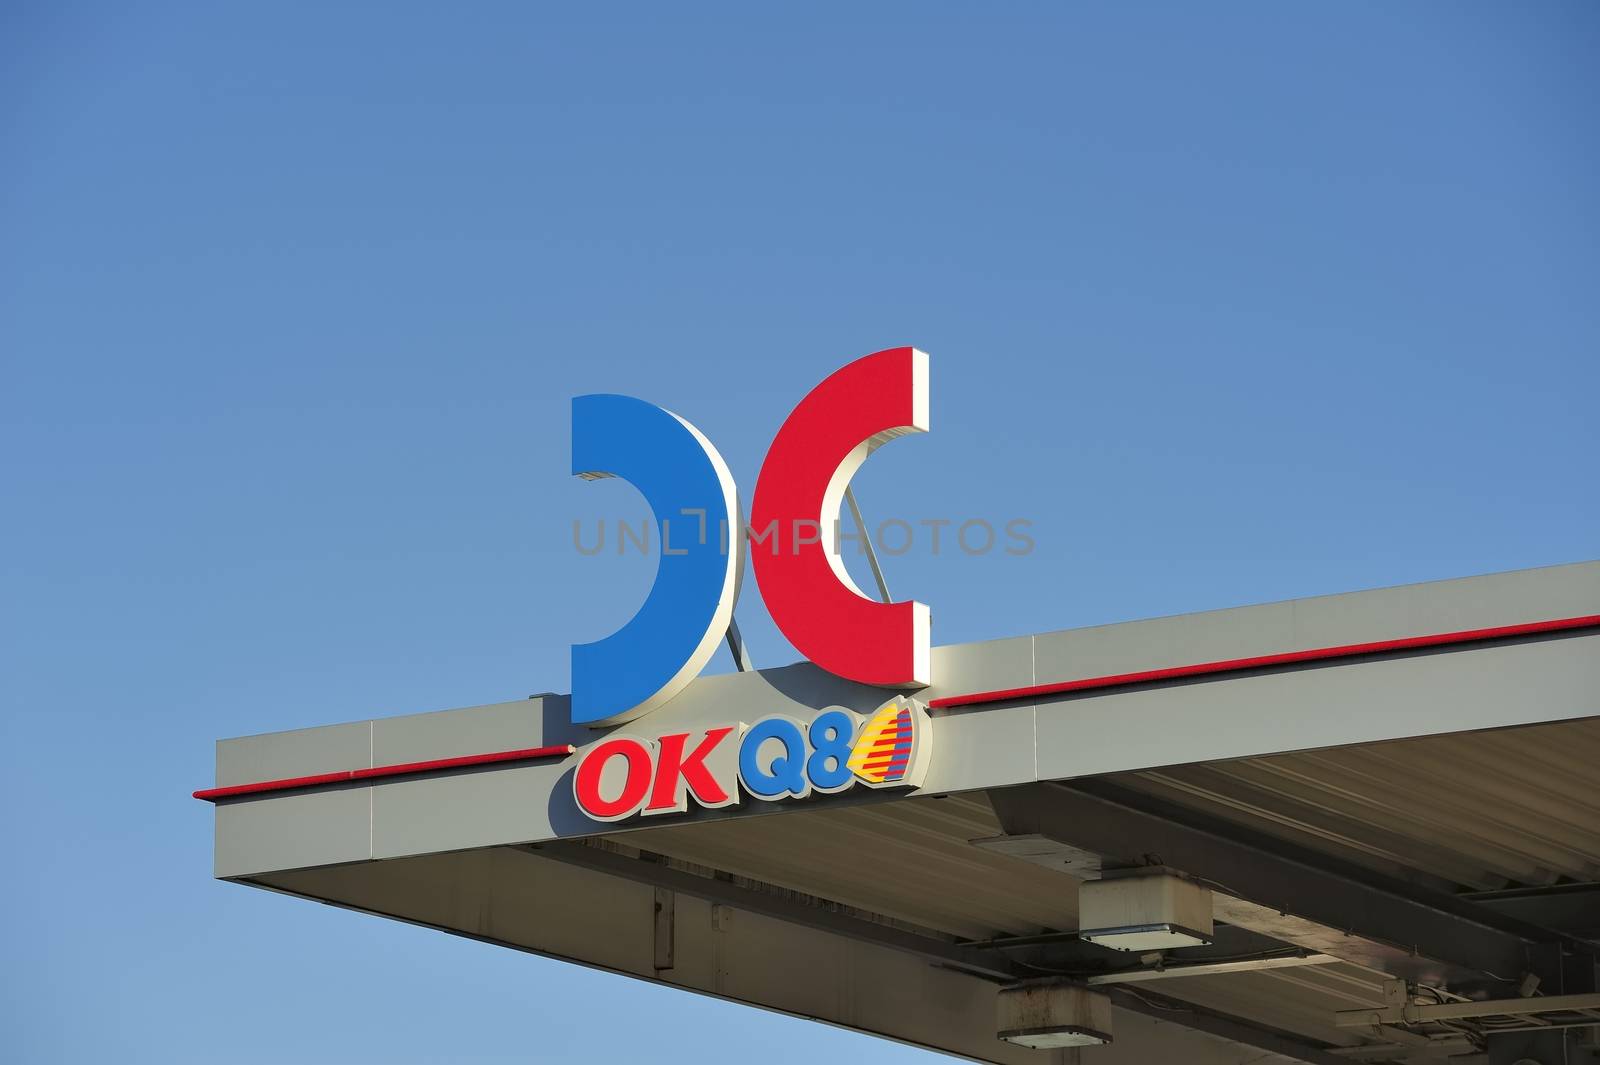 STOCKHOLM - MAY 1 2013: A OKQ8 sign on the roof of a gas station on may 1th 2013 in Stockholm, Sweden. OK-Q8 AB is a Swedish company which since 1999 operates Sweden's largest chain of gas station